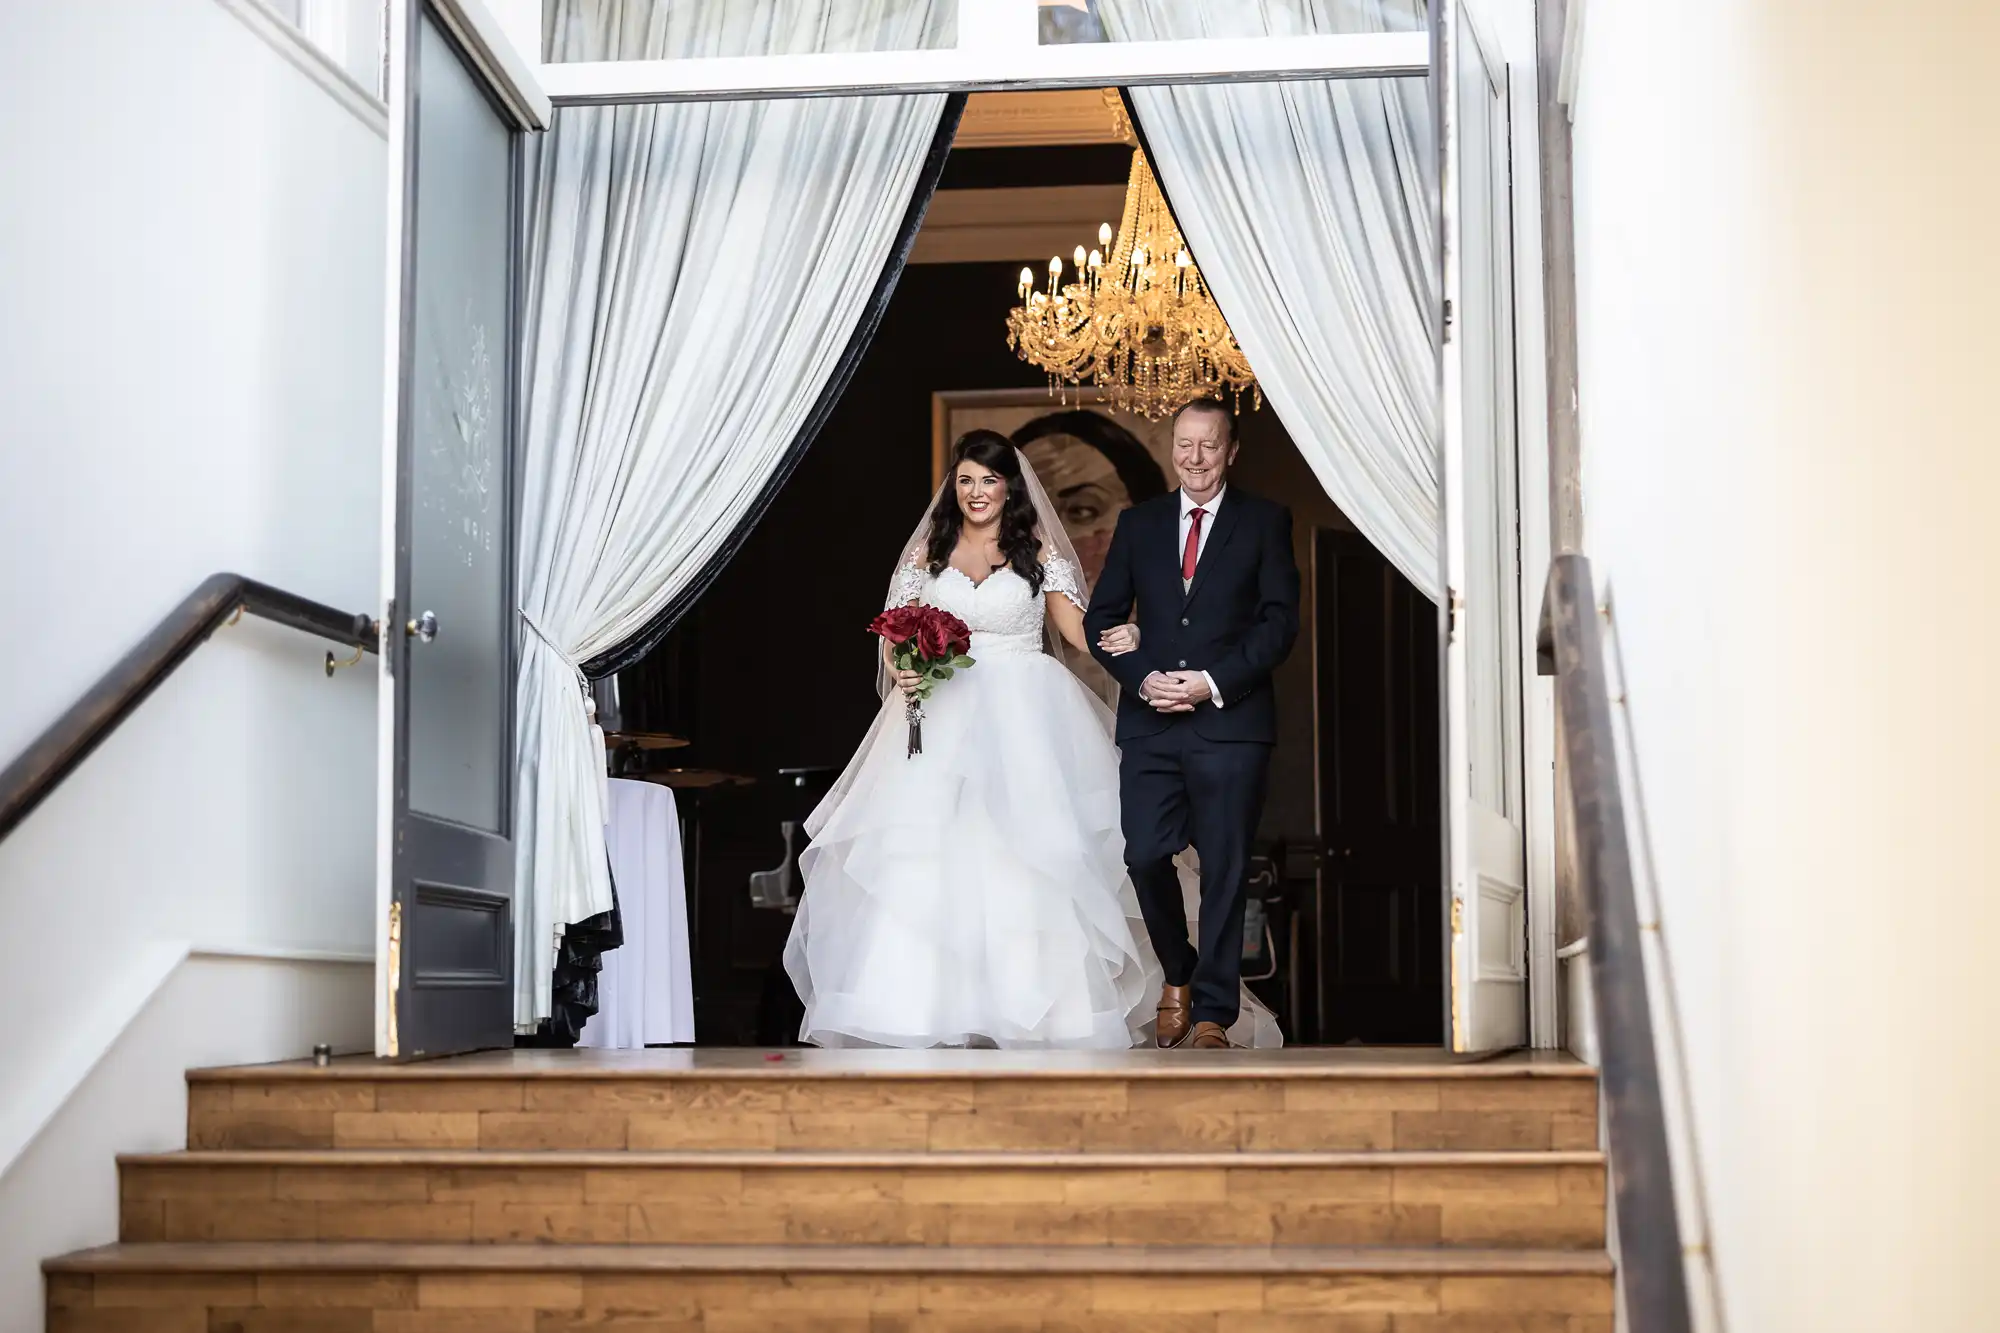 Bride in a white gown holding red roses descends stairs with a man in a suit. They are framed by open doors, white curtains, and a chandelier above.